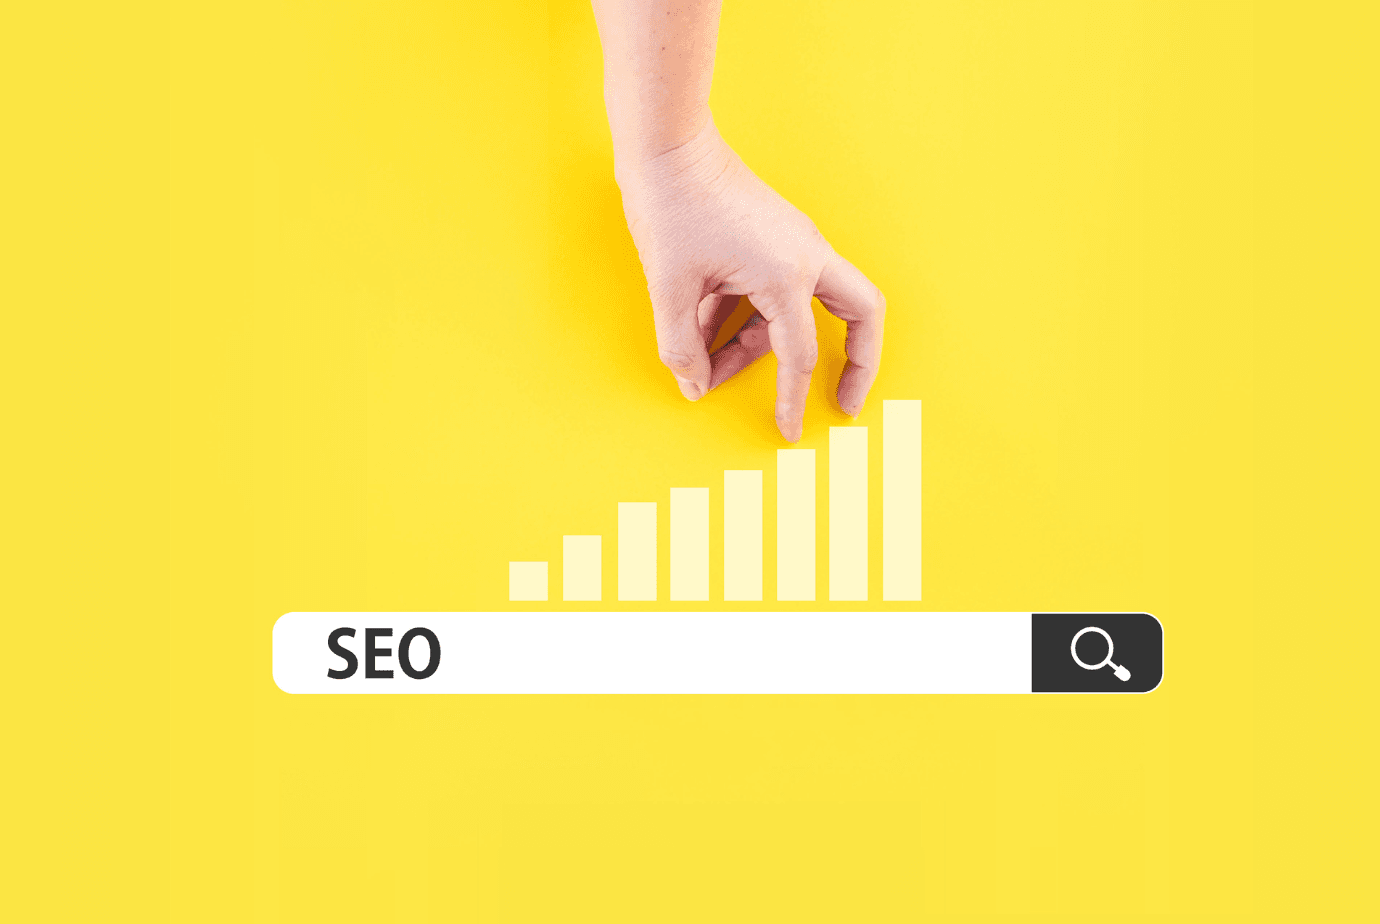 Seoperformance 0a1259e1e80f6f3b1abc5de4aa093cb5 2000 How to Improve Your SEO Performance with These 20 Proven Tips